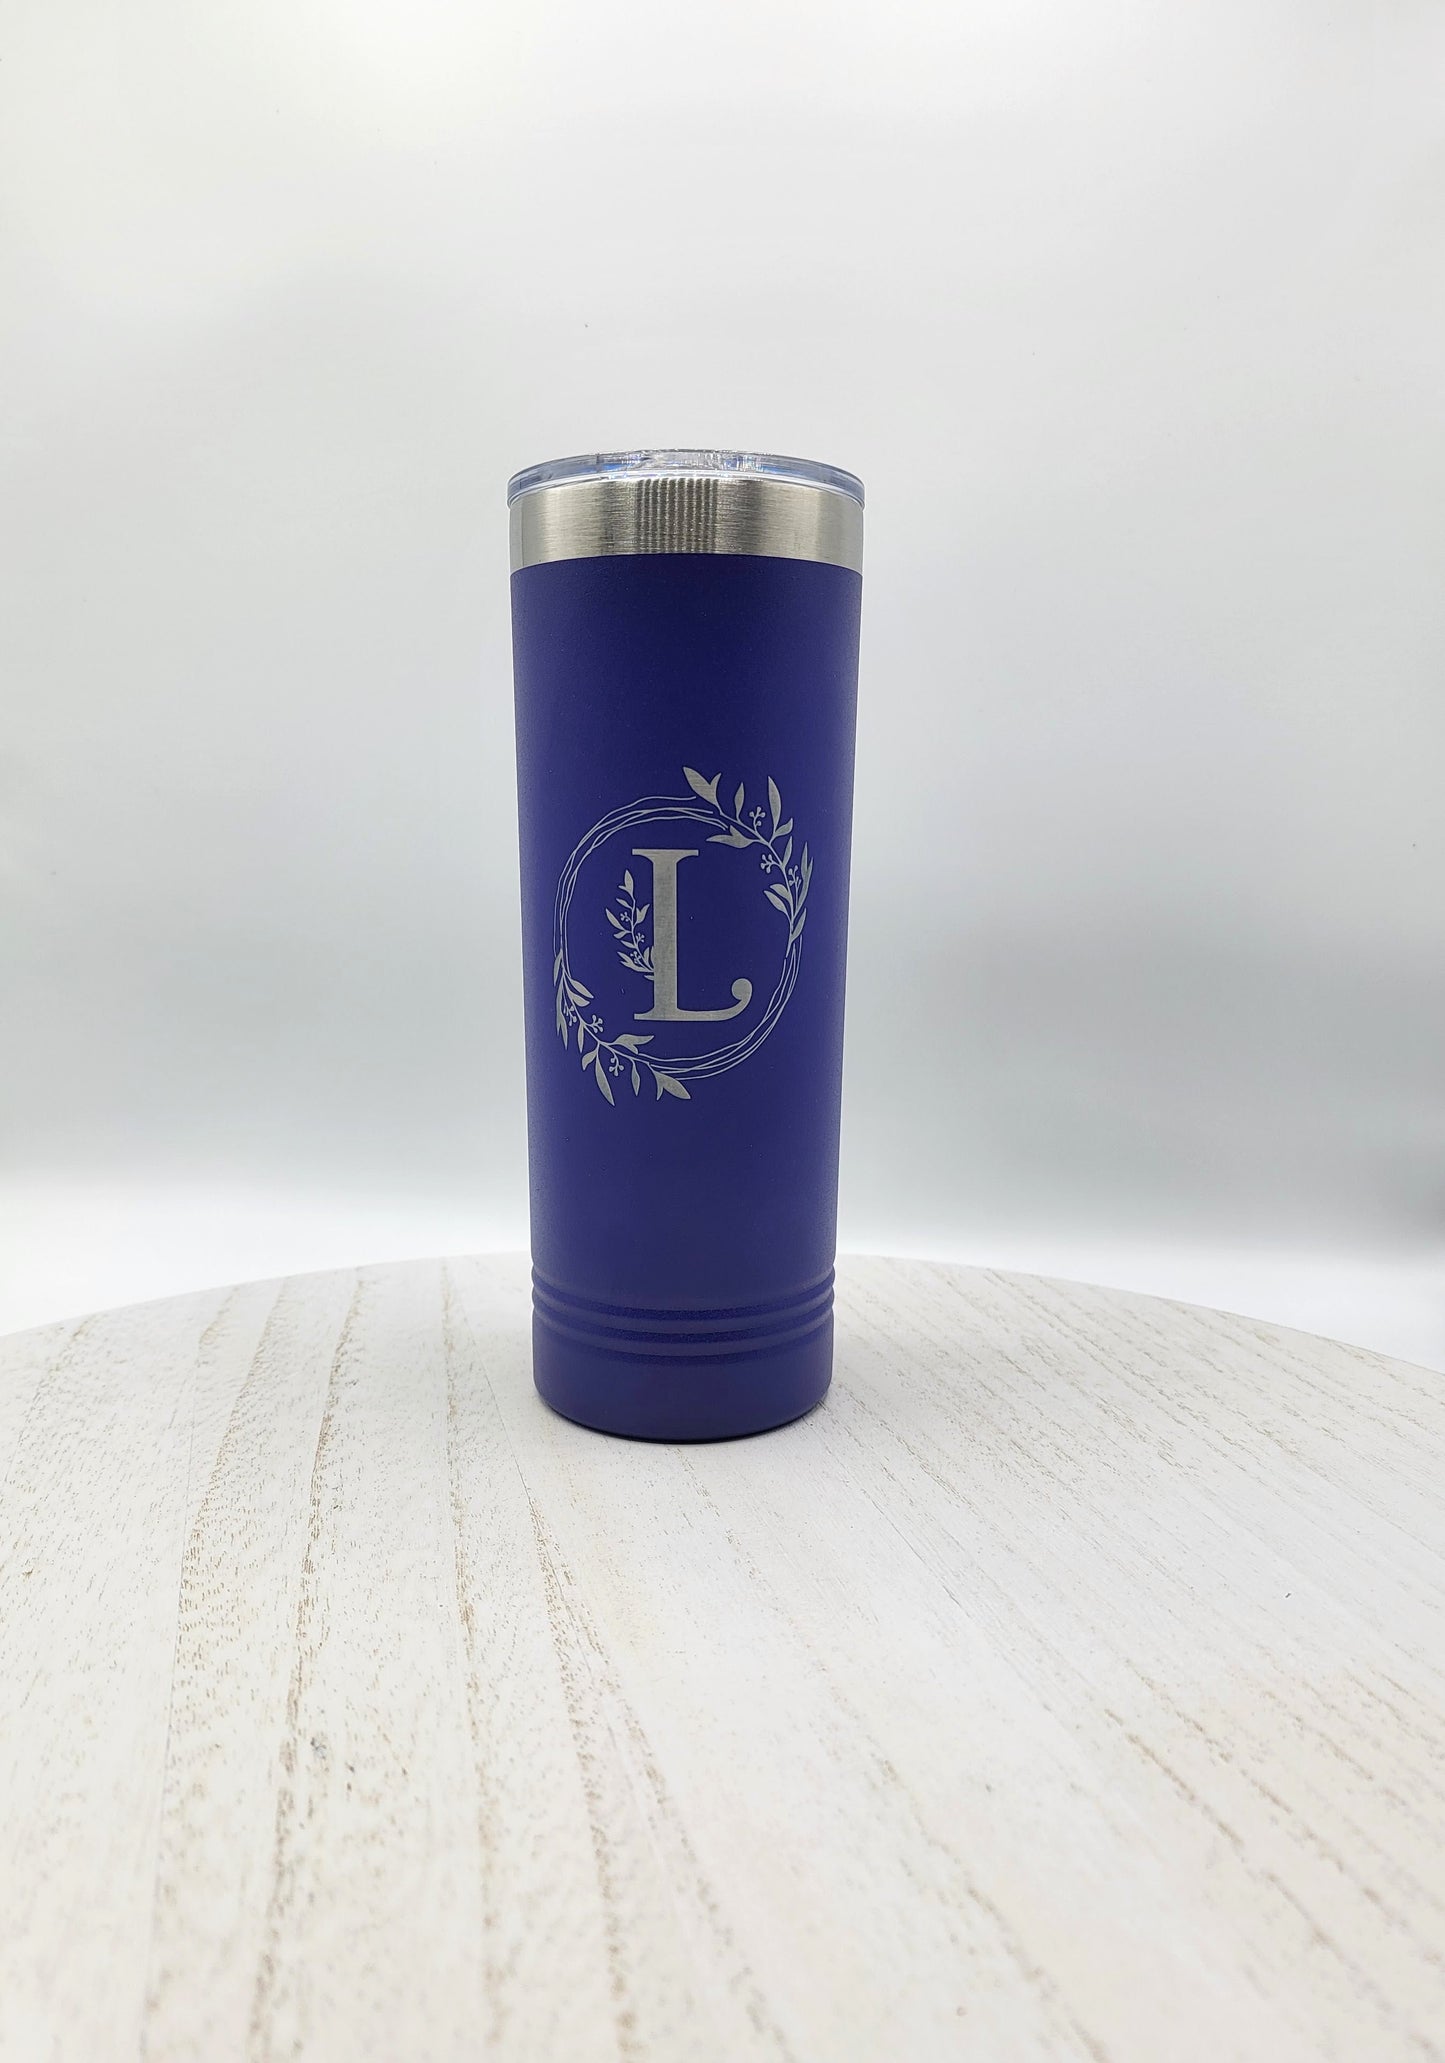 Personalized Initials S-W Floral Wreath Skinny Tumbler